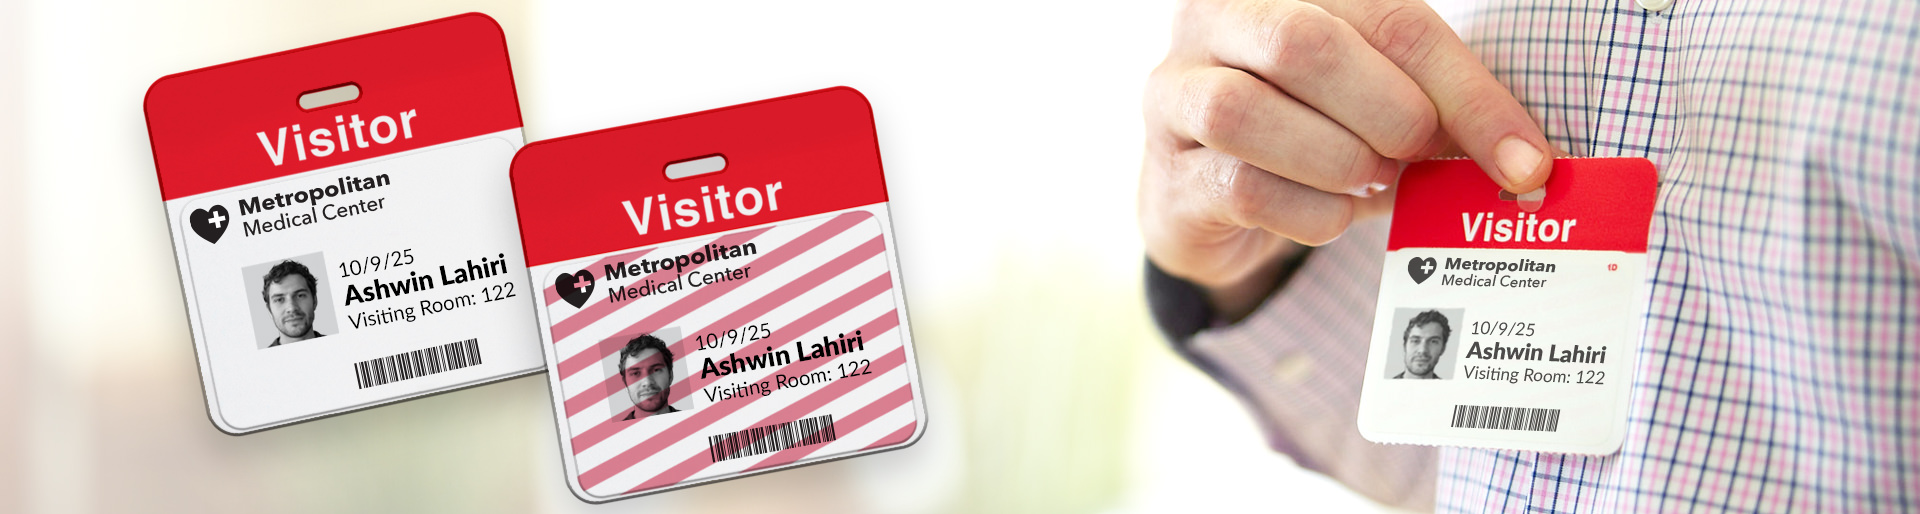 Healthcare Expiring Visitor Badges